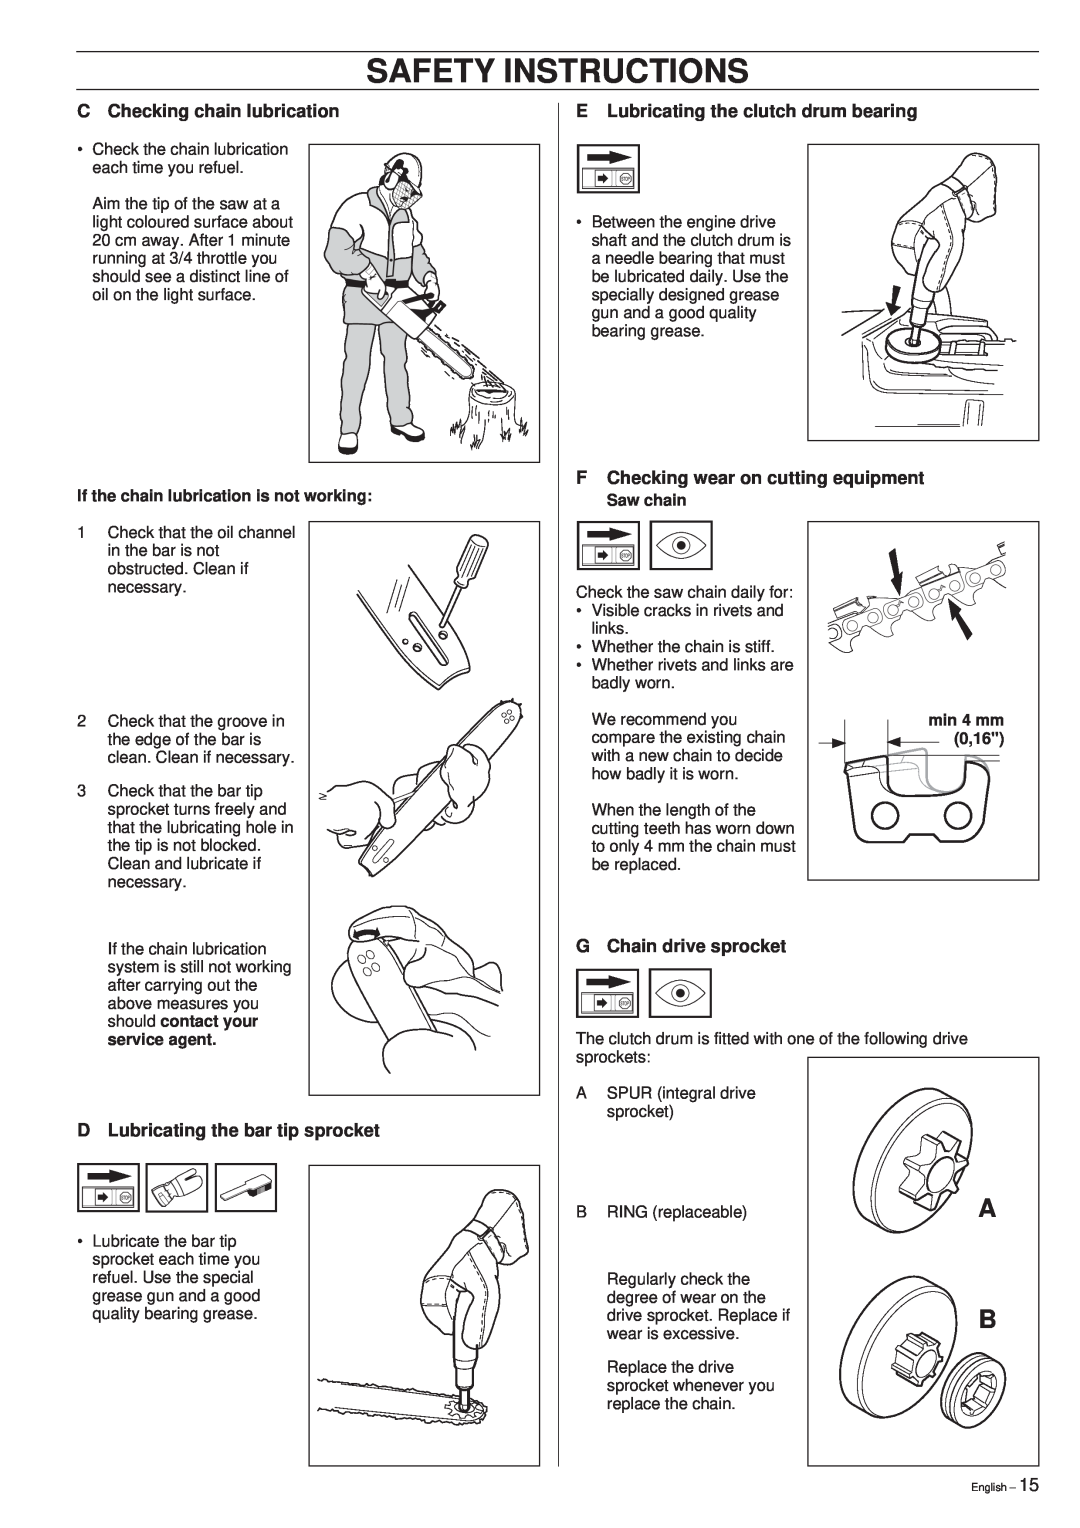 Husqvarna 45 manual Safety Instructions, C Checking chain lubrication, E Lubricating the clutch drum bearing 